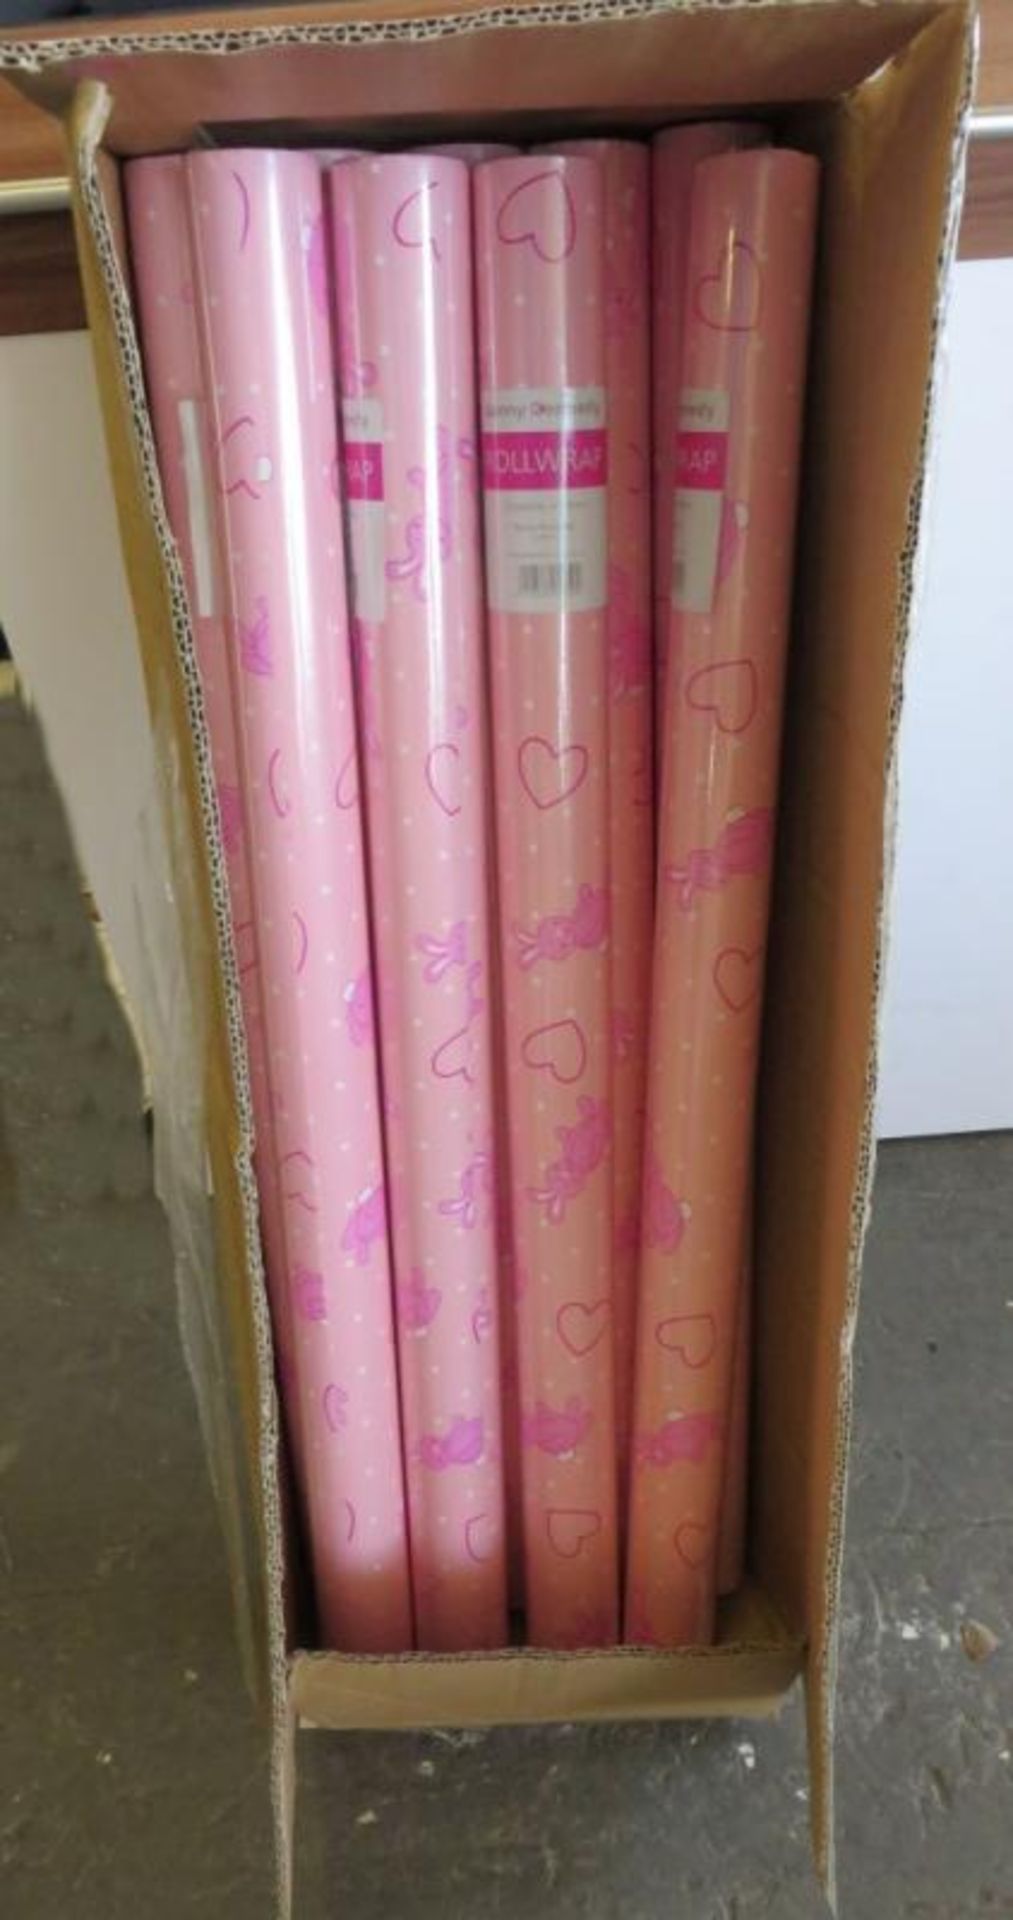 9 x Rolls of Bunny Wrap Wrapping Paper - CL185 - Ref: DRT0685 - Location: Stoke ST3 Items located in